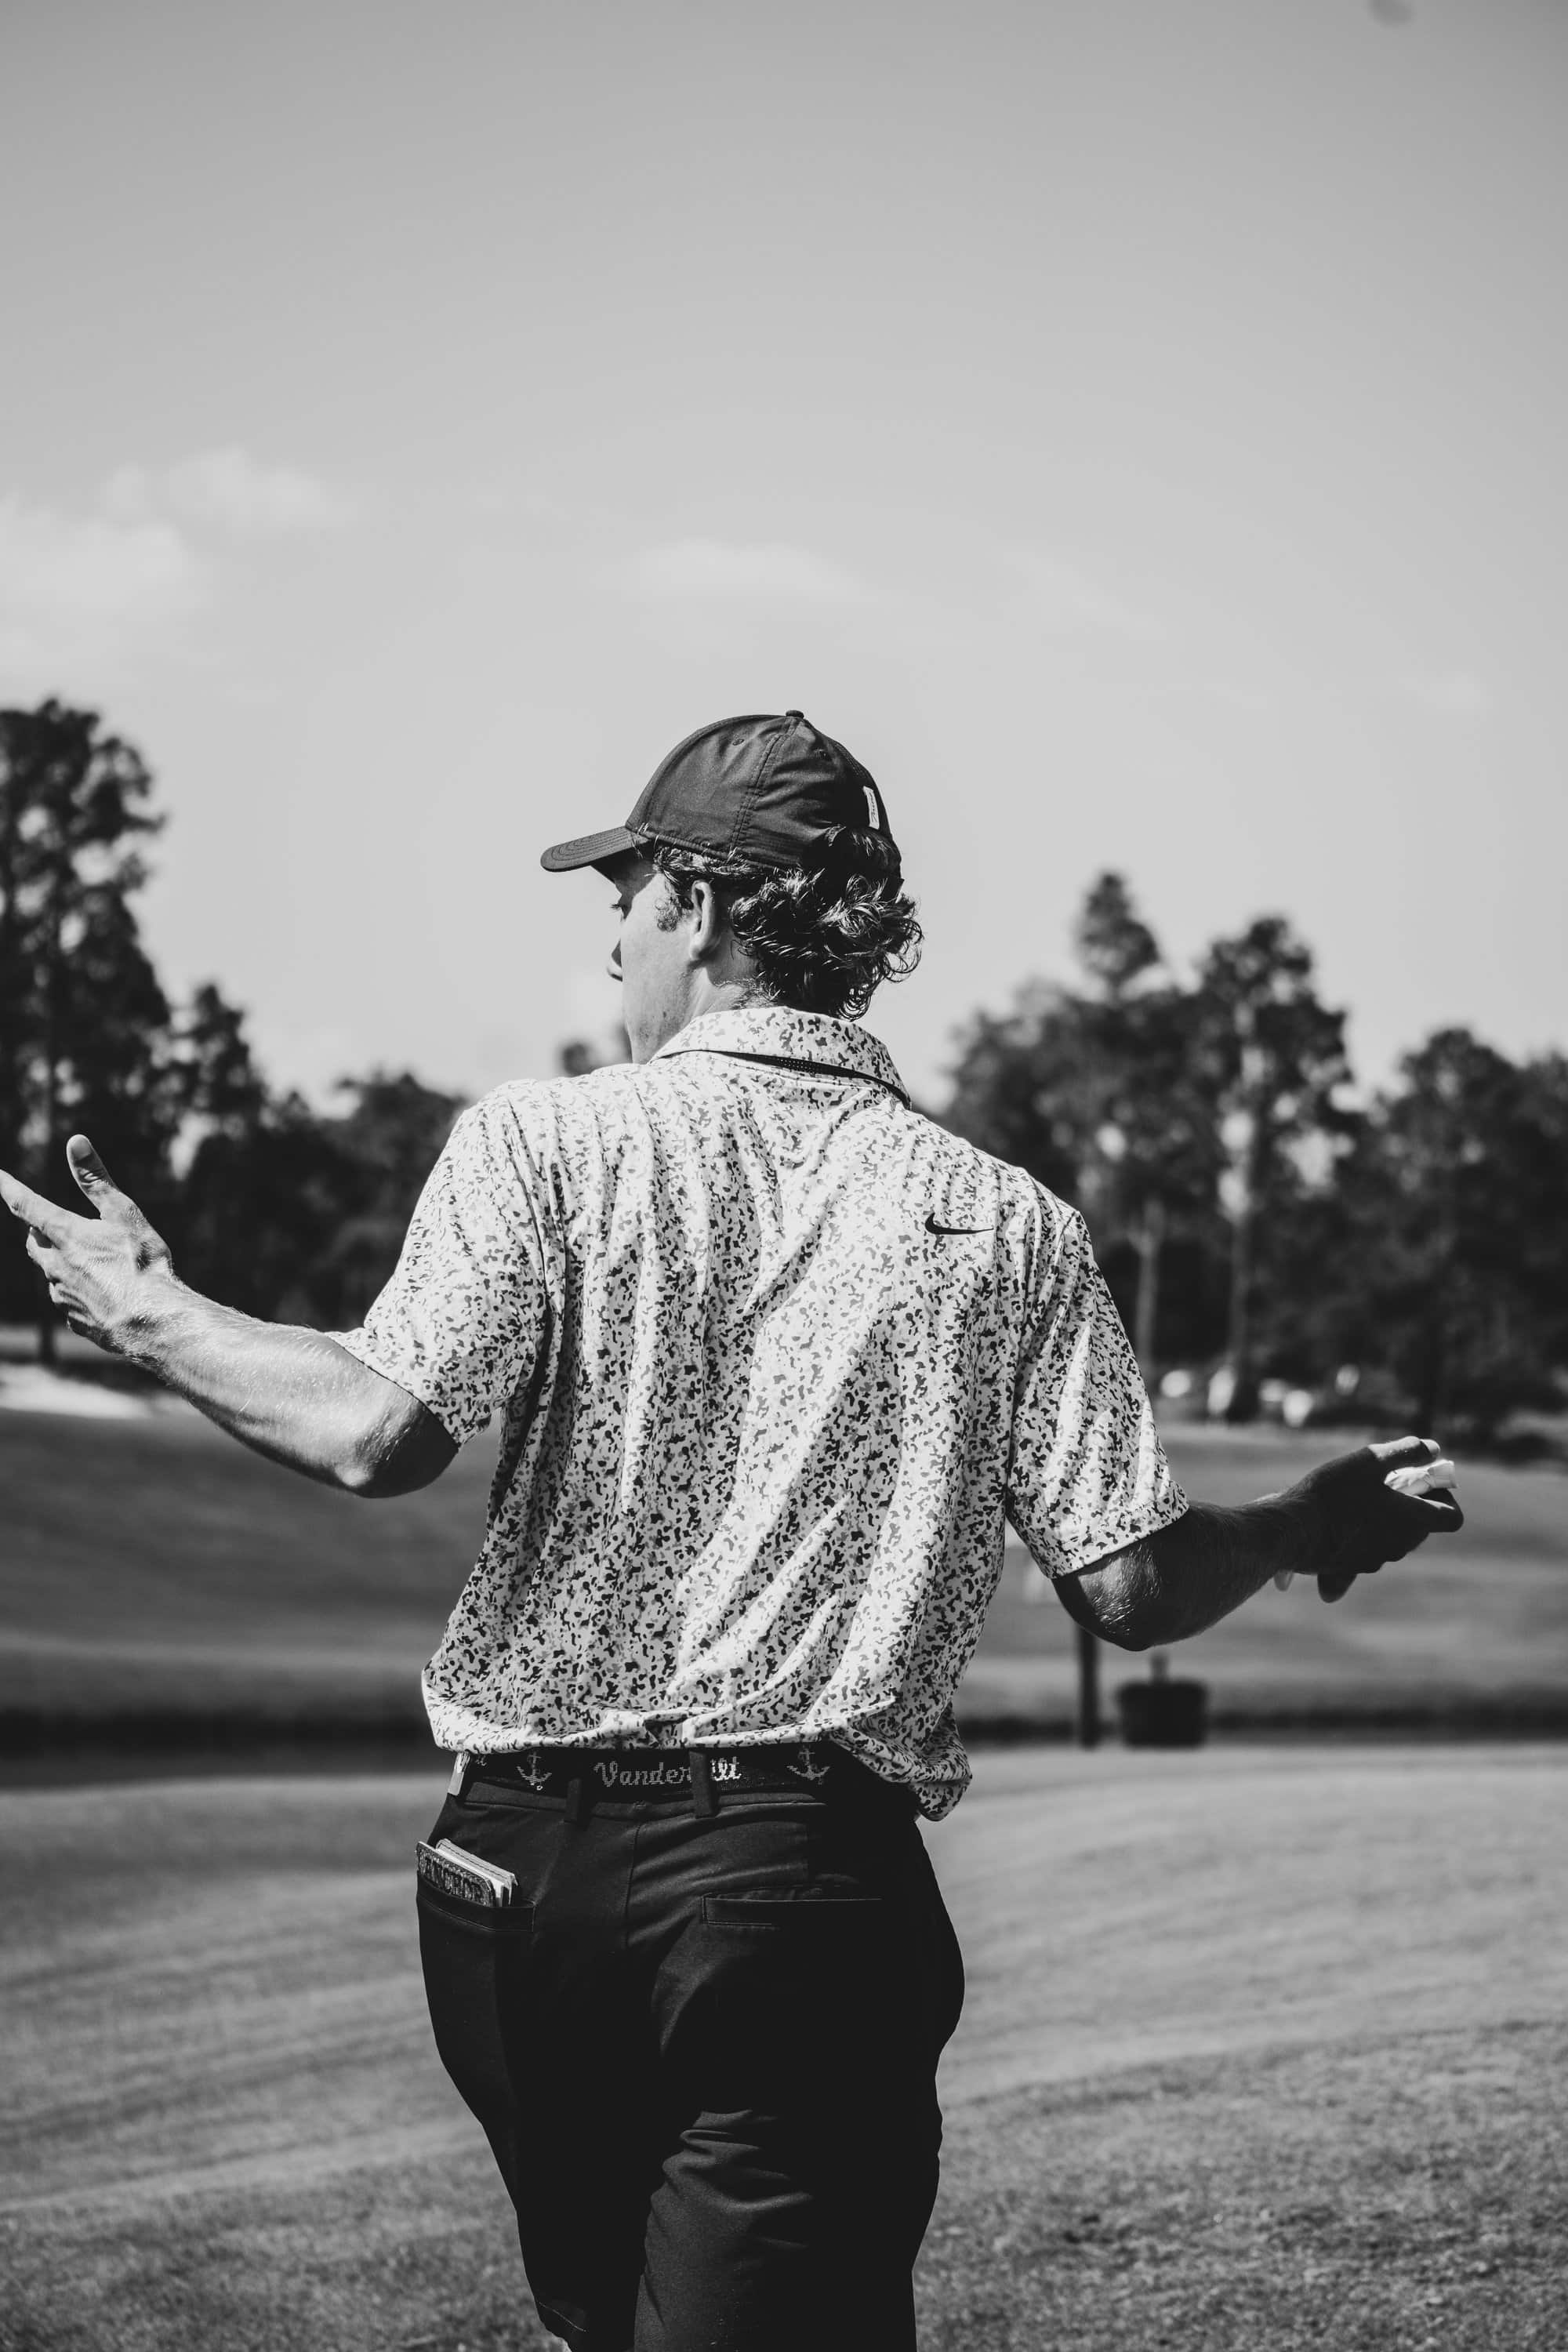 Jackson Van Paris motions back to his caddie during his first-round 61 in the 123rd North & South Amateur on Tuesday. (Photo by Zach Pessagno)